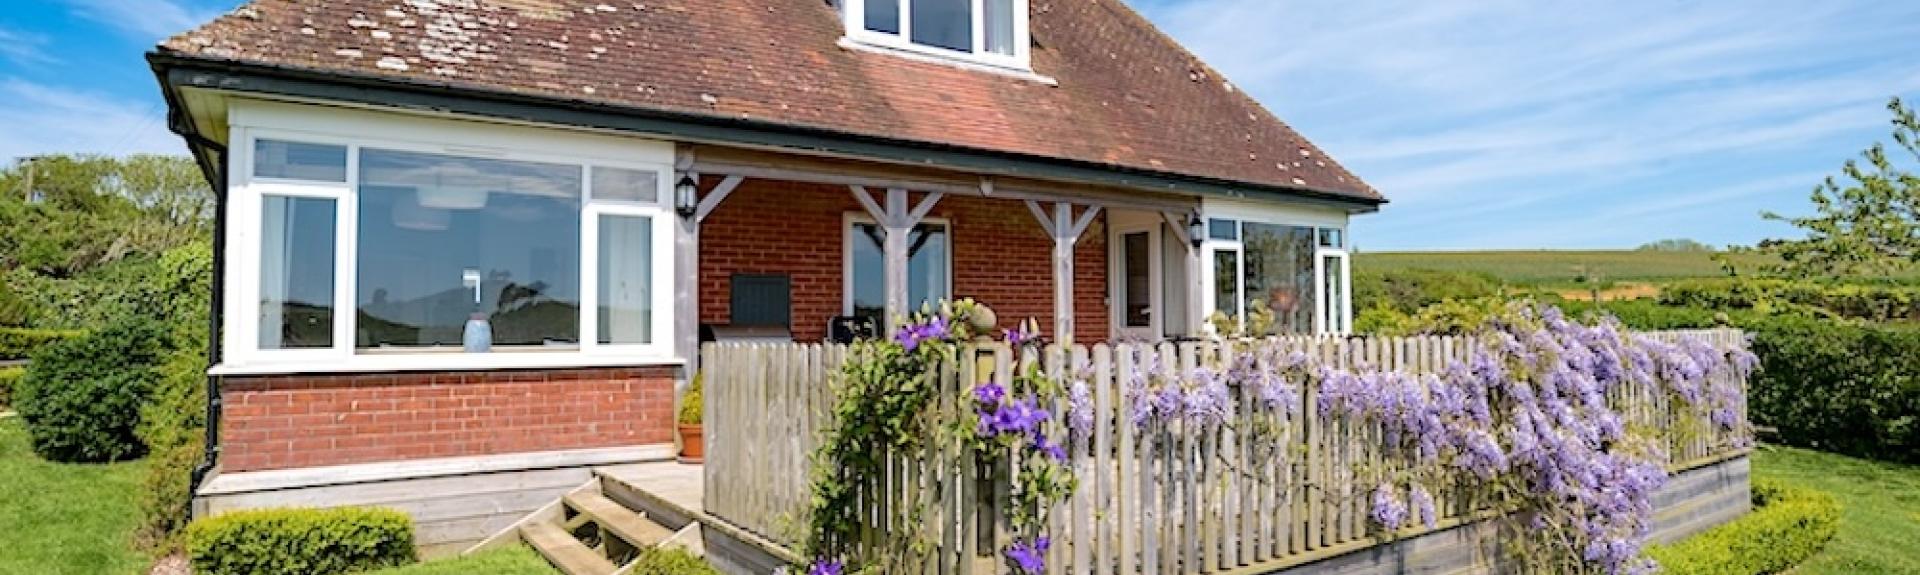 1930s-style detached chalet bungalow with a paved deck surrounded by lawns and the Dorset countryside.